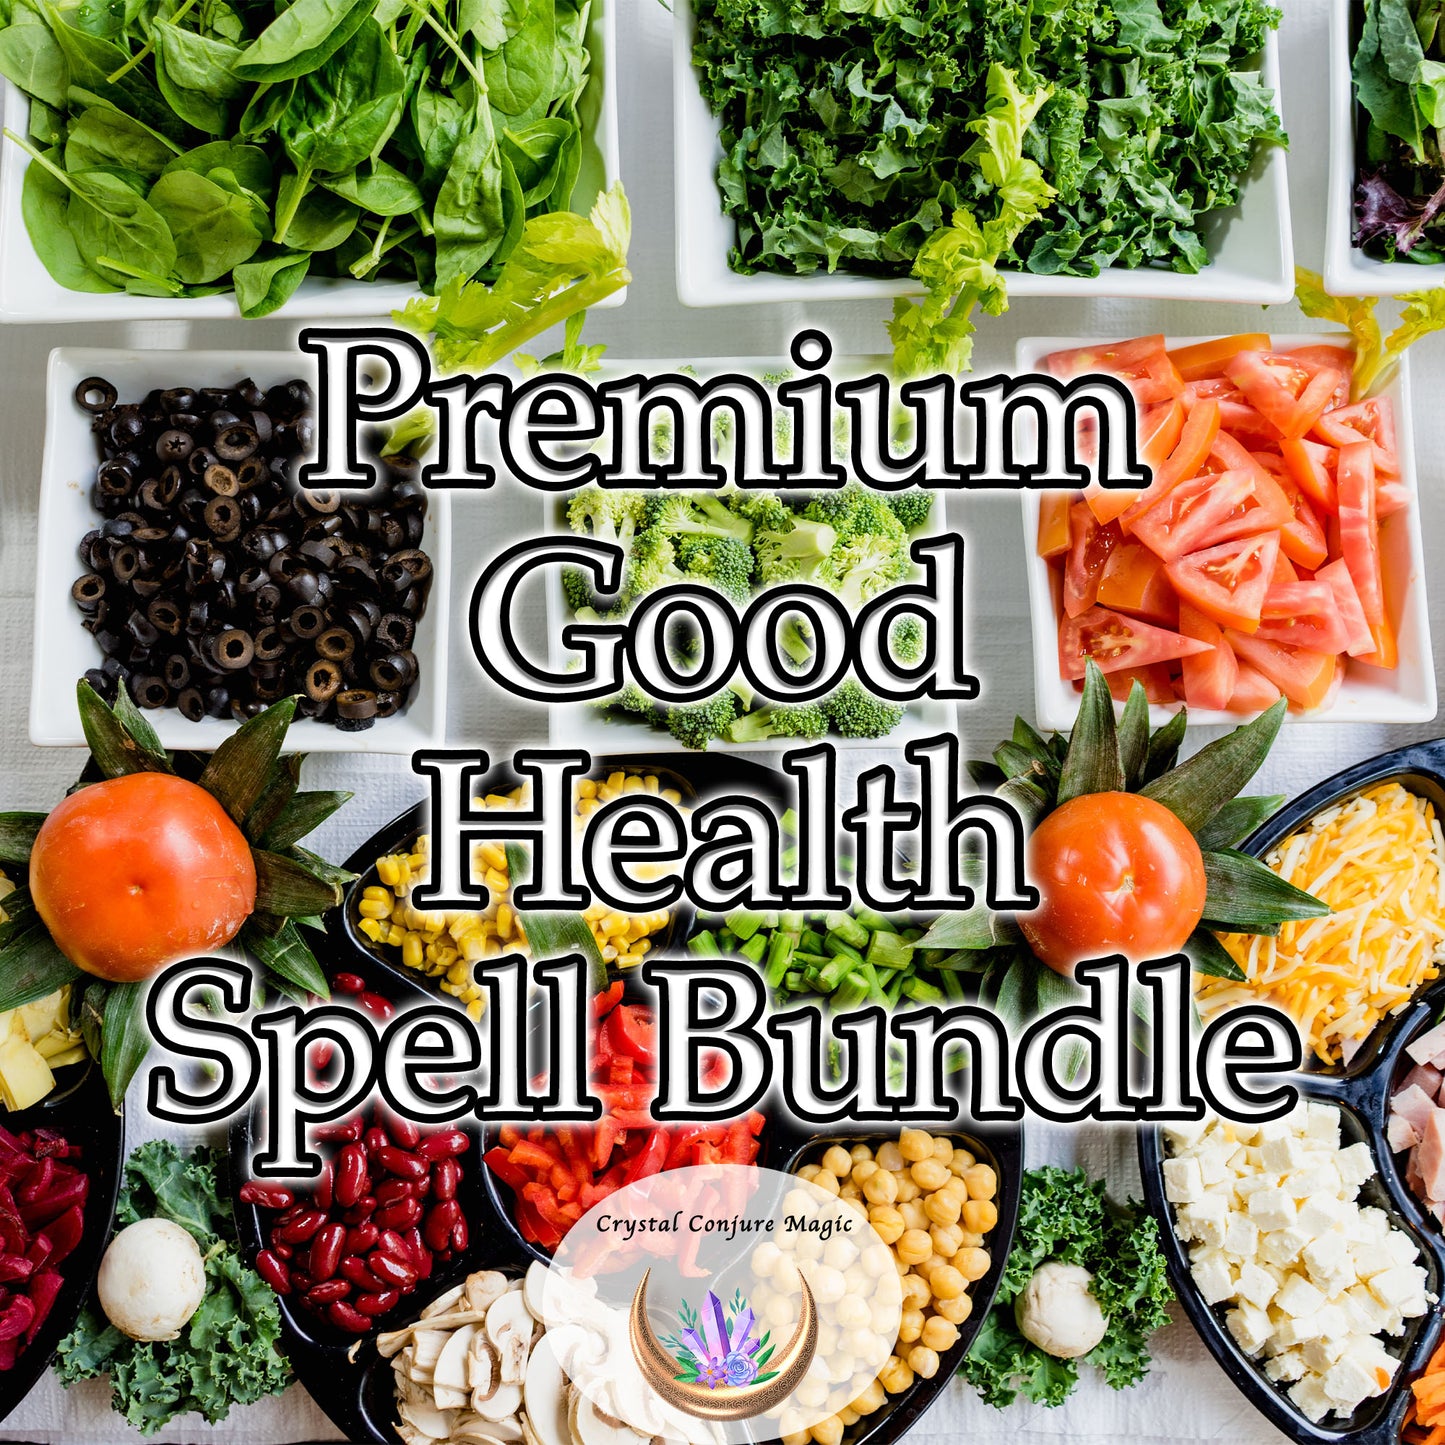 Premium Good Health Spell Bundle - embrace a life of health and vitality with this ancient spell